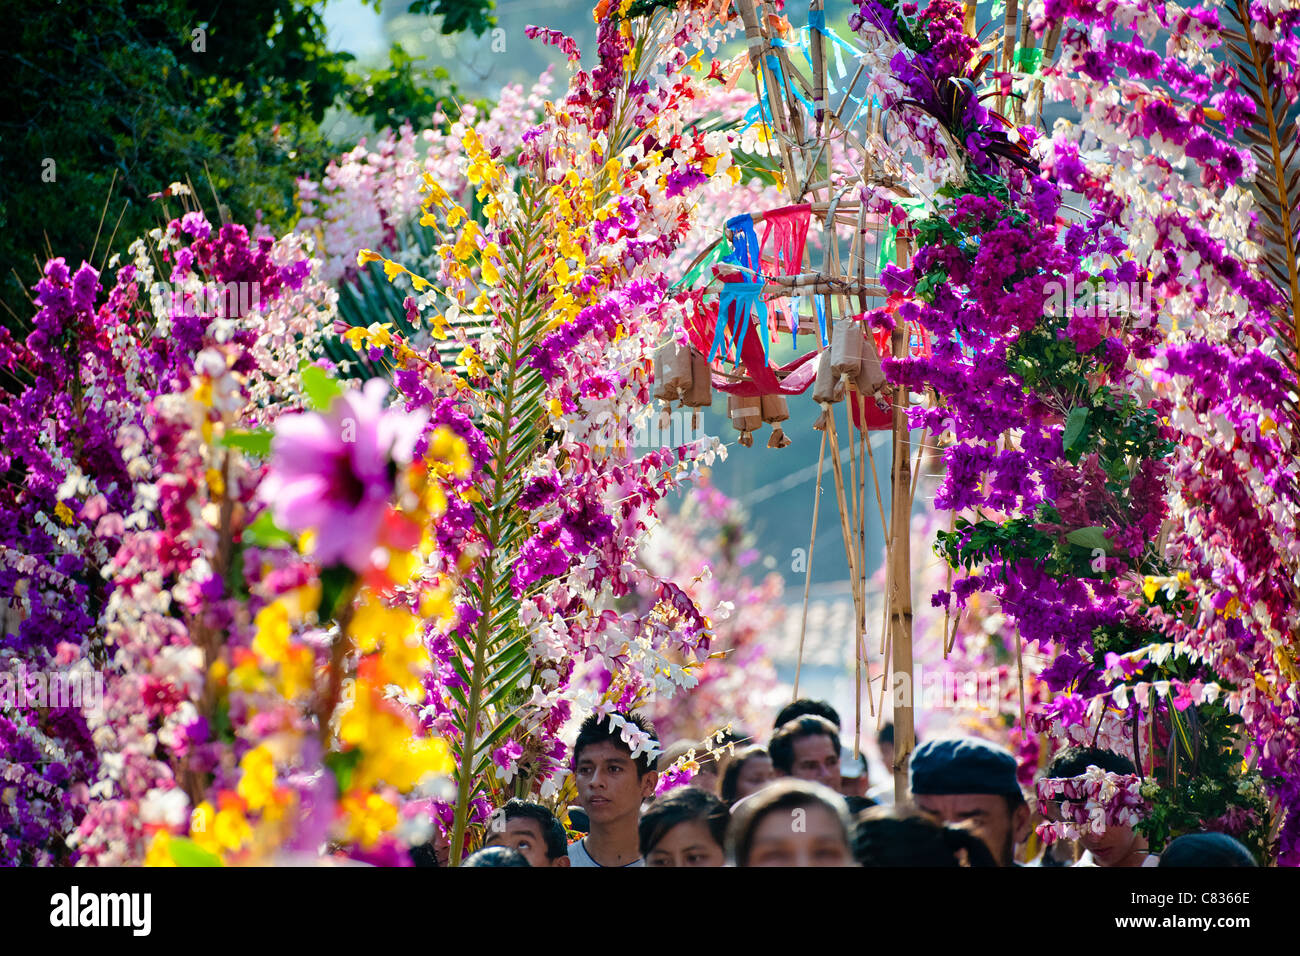 Salvadoran people carry palm branches with colorful flower blooms during the Flower & Palm Festival in El Salvador. Stock Photo